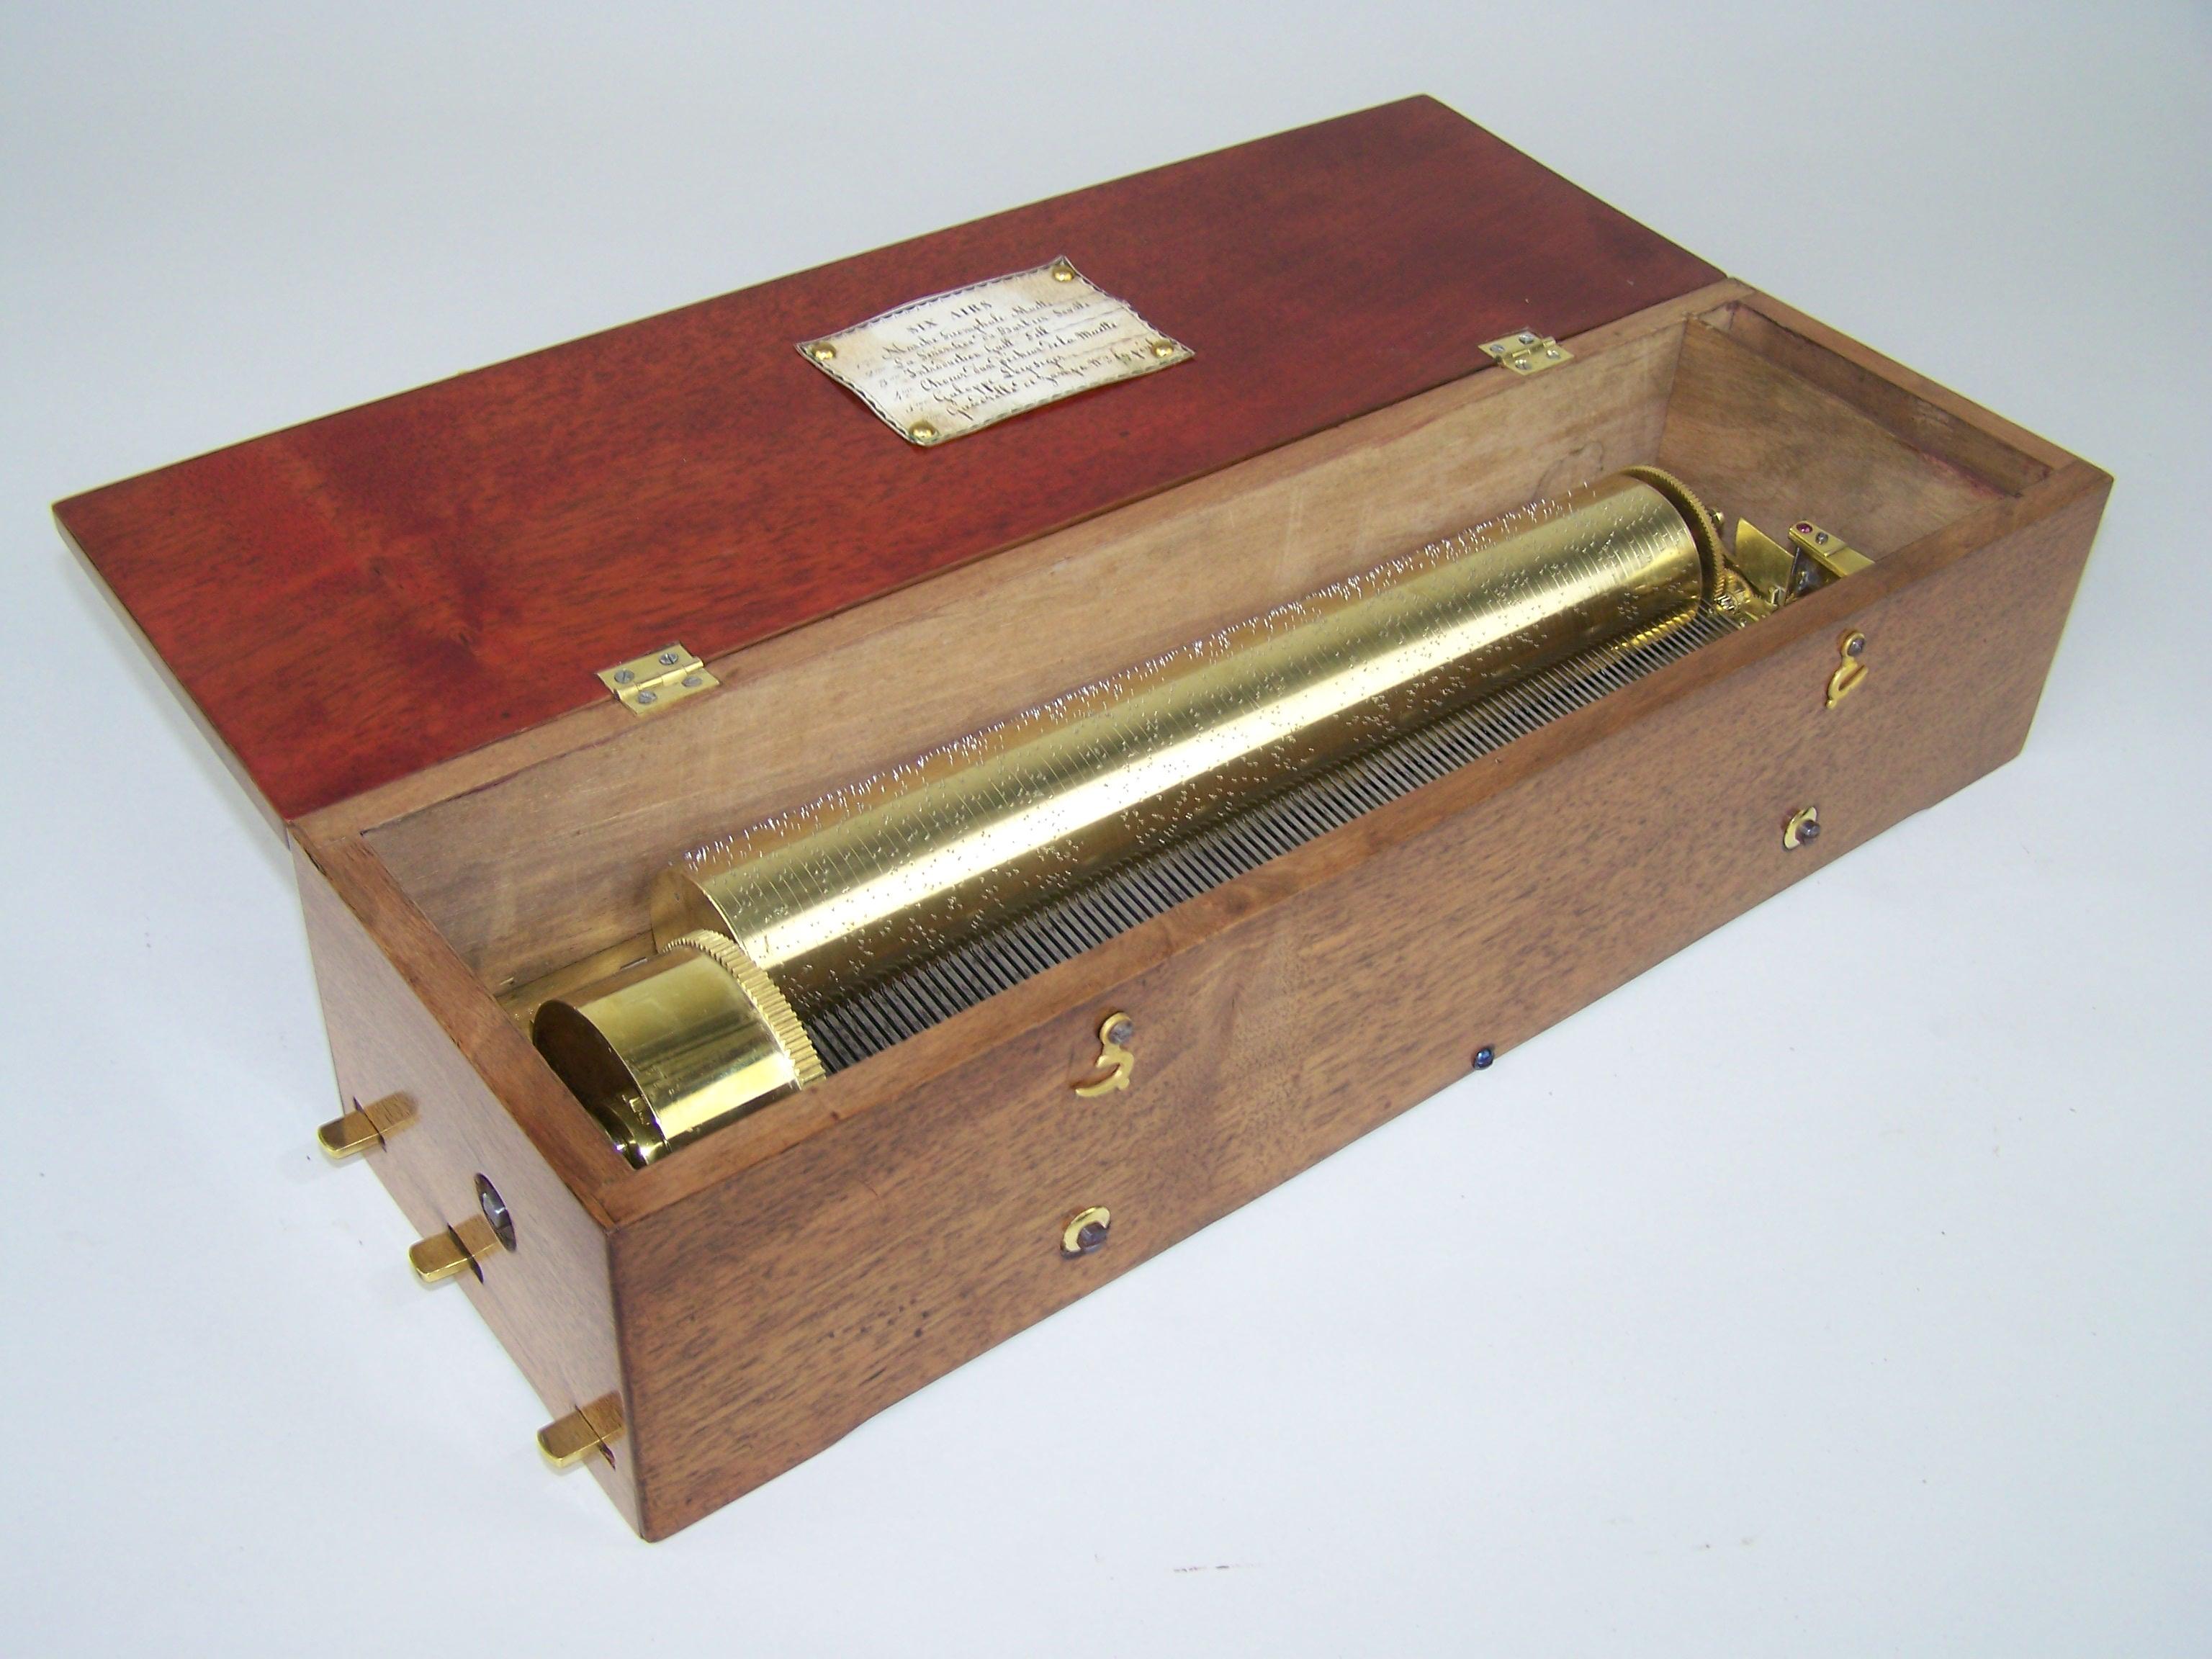 Beautiful, early and rare music box made in the early 19th century. This early music box plays 6 melodies on a 25,7cm cylinder. At the beginning of the 19th century, boxes of excellent musical quality were built. This box is an outstanding example.